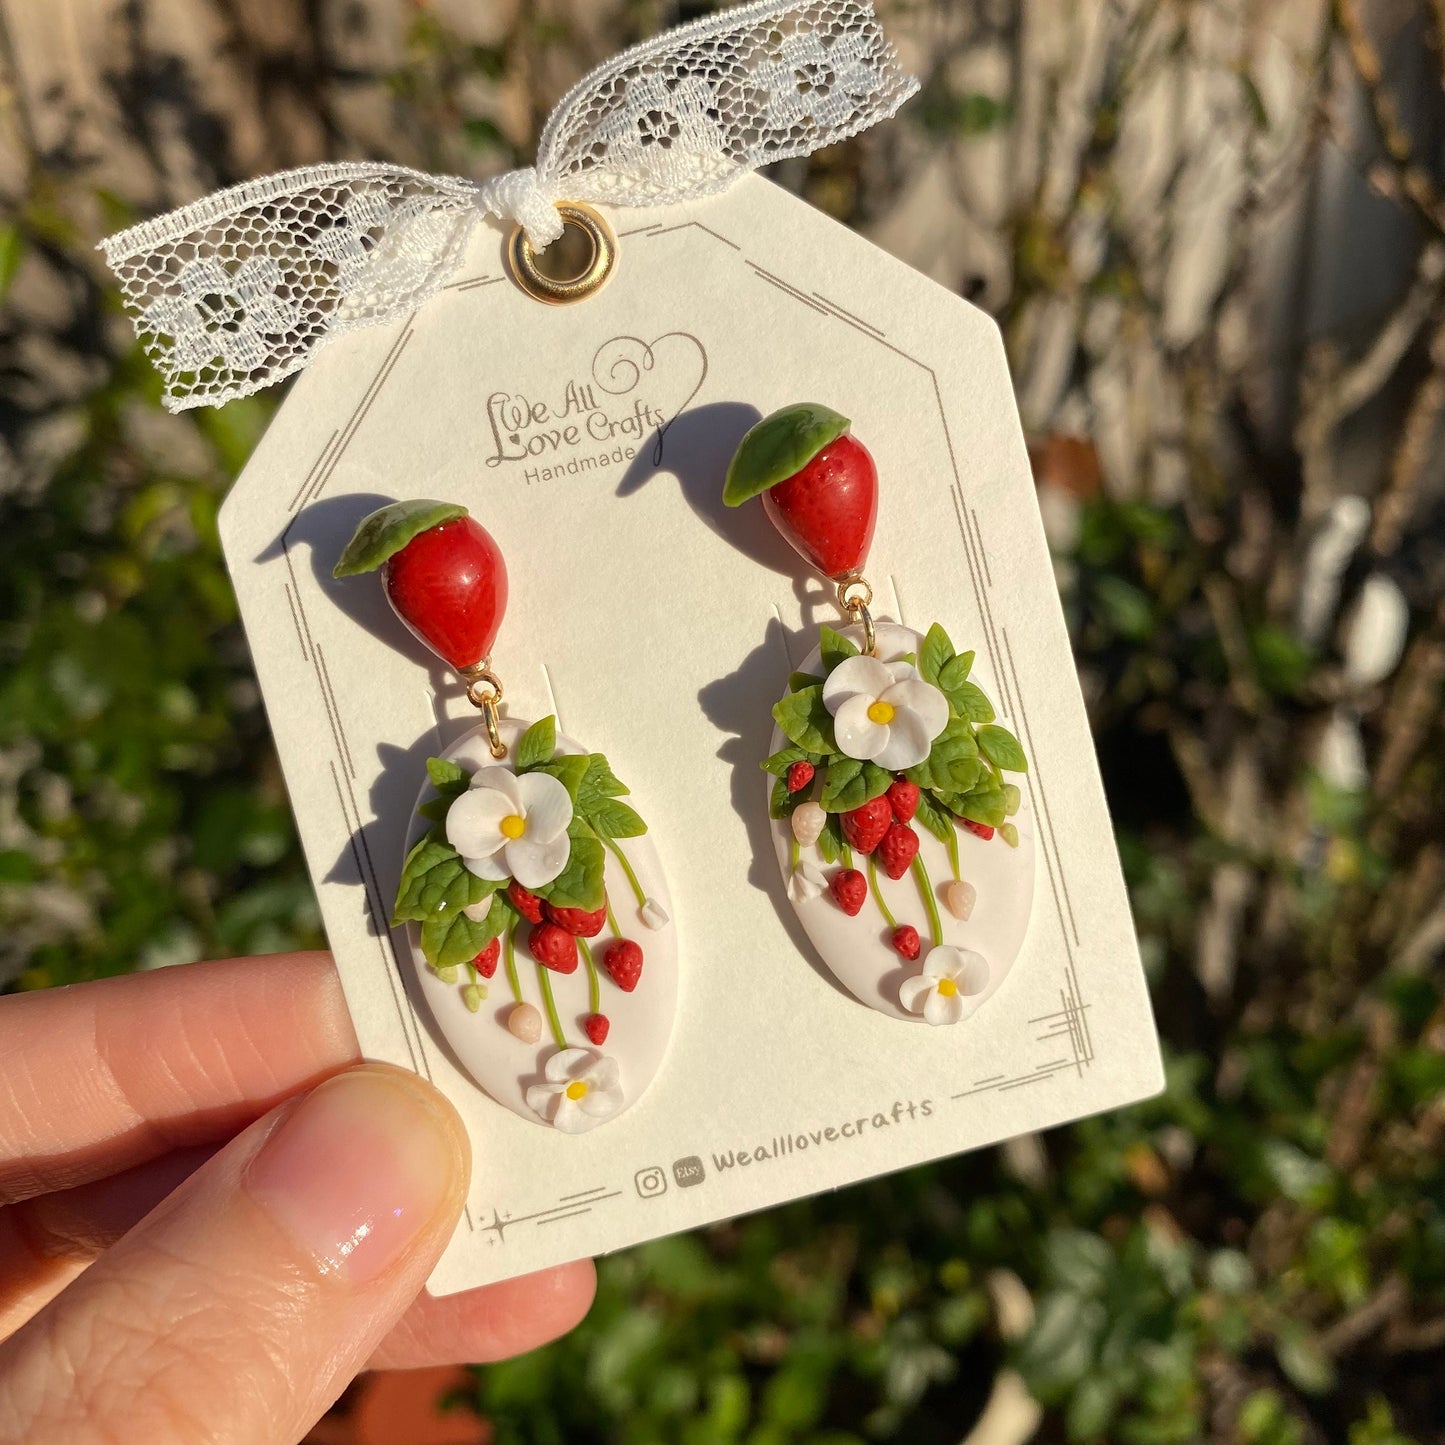 Load image into Gallery viewer, Strawberry flower polymer clay handmade stud earrings/925 nSterling silver jewelry/Summer fruit gift for her/Ship from US
